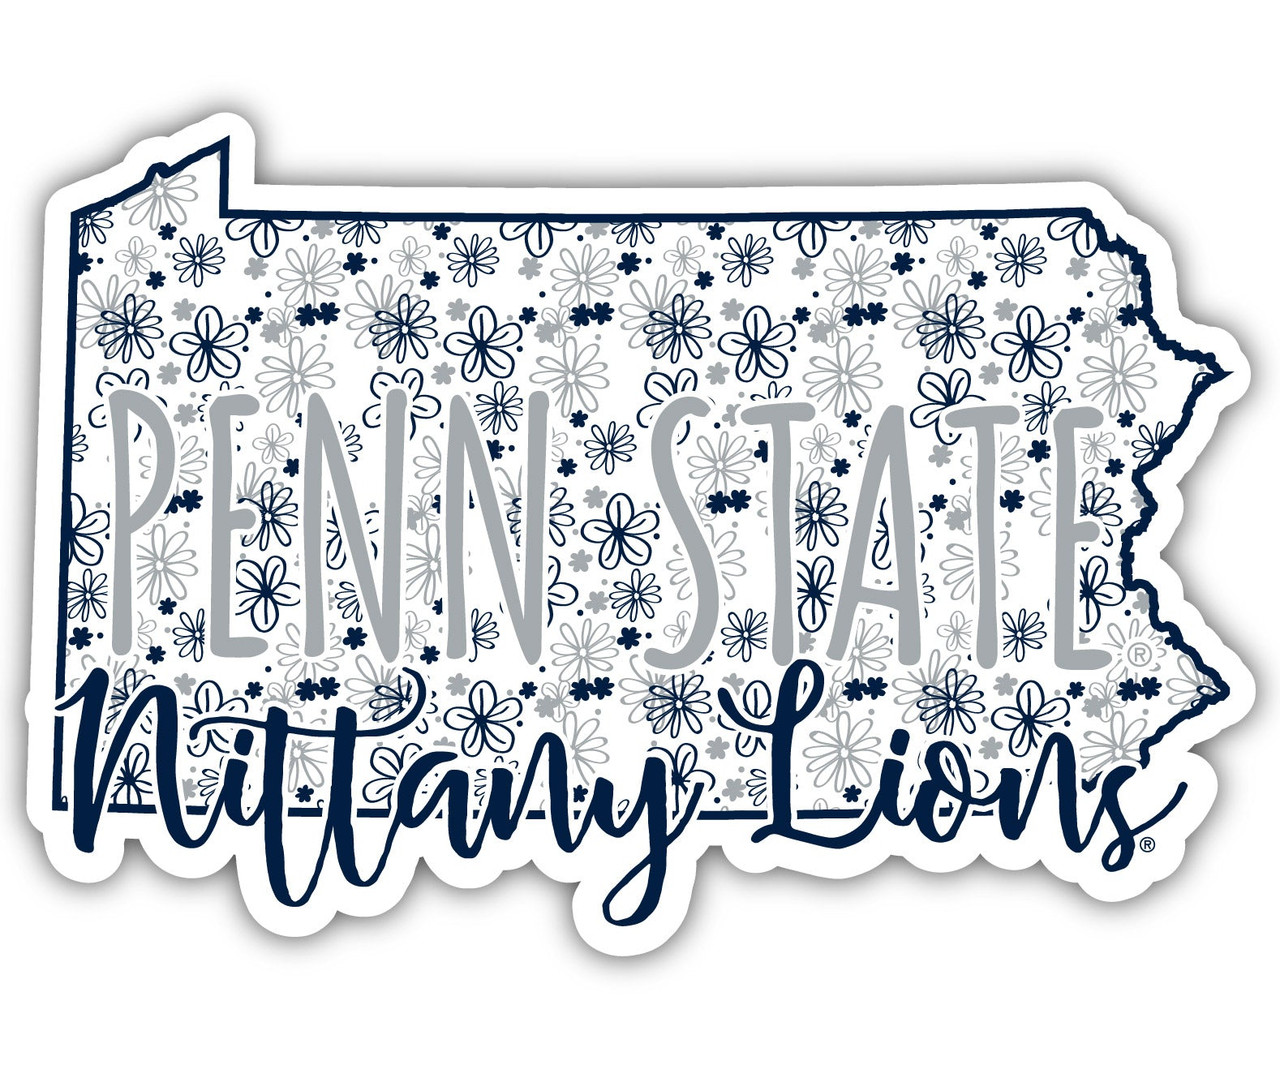 Penn State Nittany Lions Floral State Die Cut Decal 2-Inch